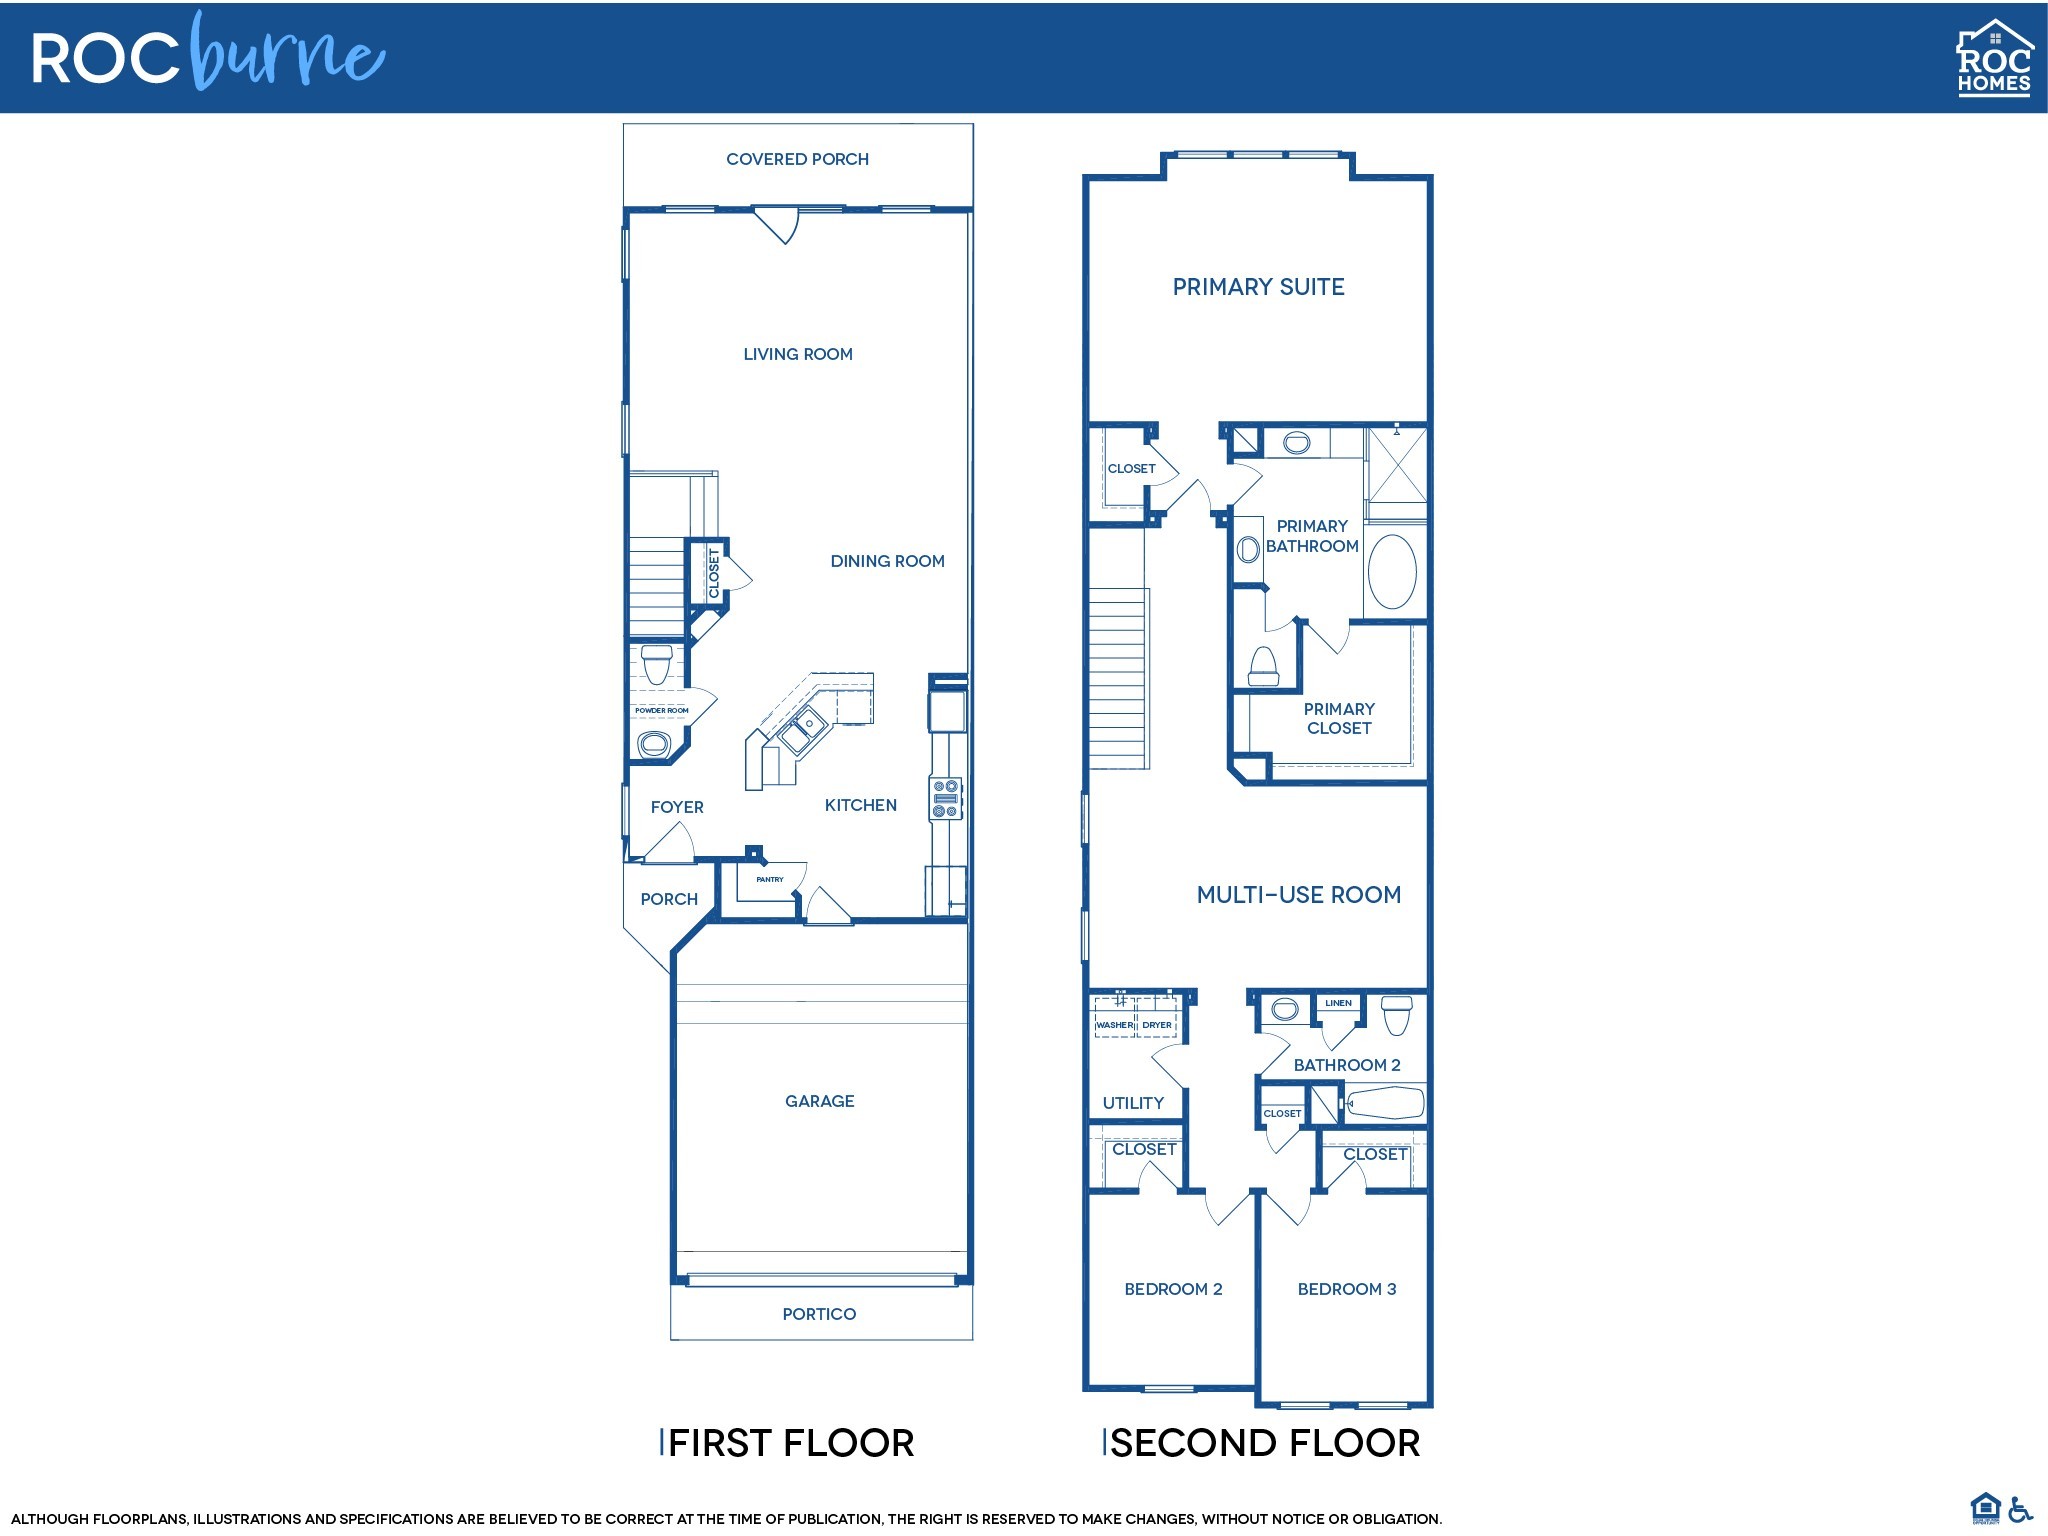 The ROCburne's floor plan has a focus on privacy and functionality, with living spaces on the ground floor and 3 bedrooms on the second floor.